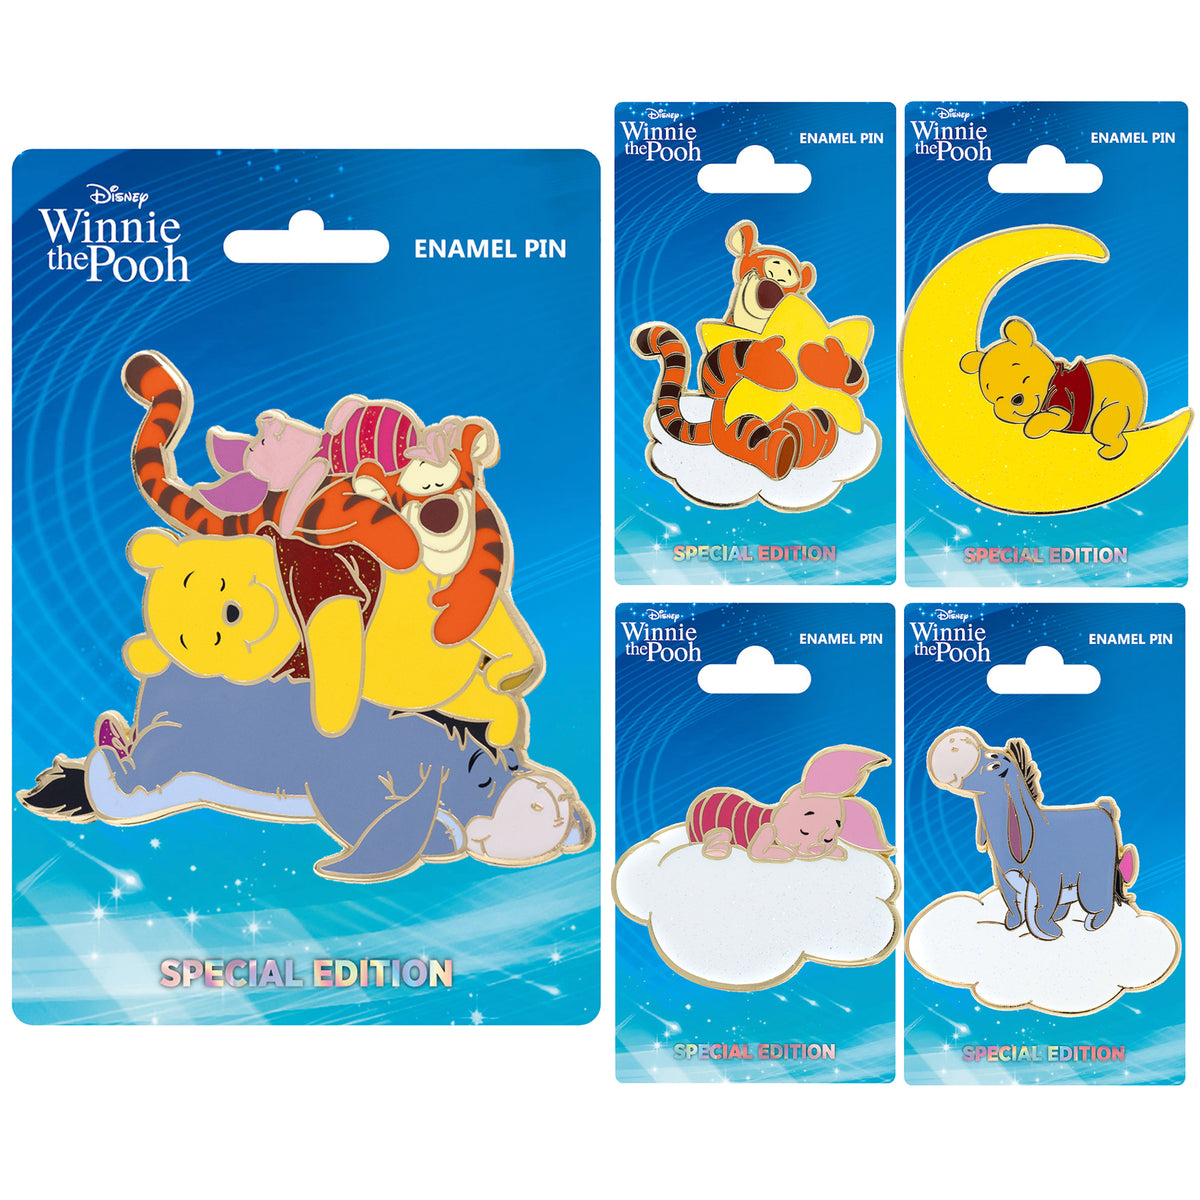 Disney Winnie the Pooh Dream Time Series Full Set Collectible Pin - NEW RELEASE